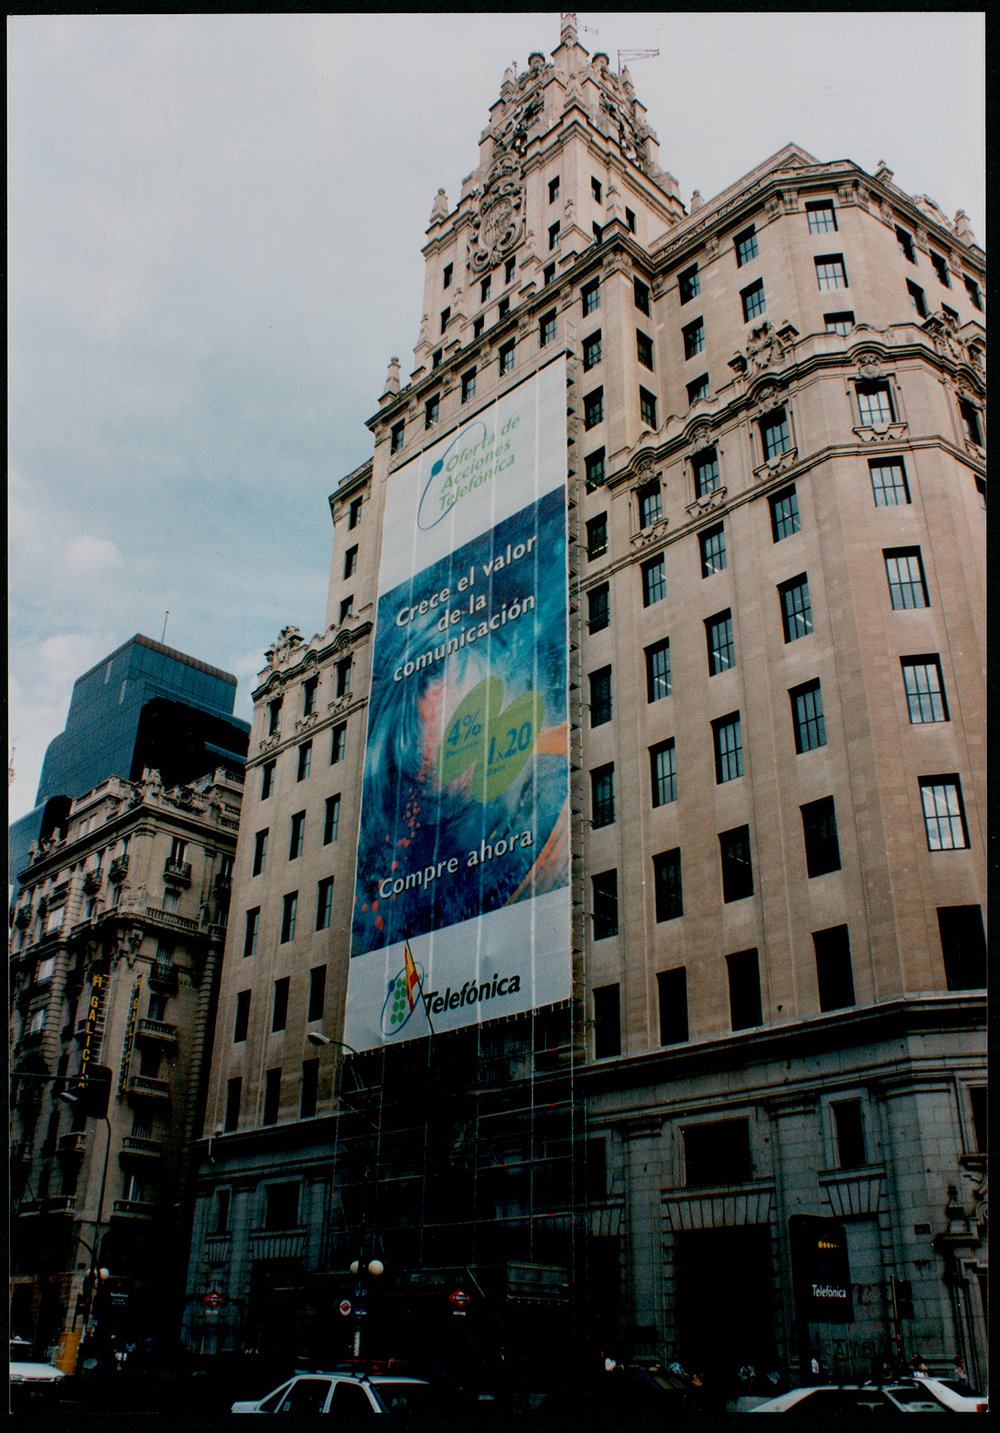 TELEFÓNICA'S CENTRAL BUILDING AT GRAN VÍA 28 WITH ADVERTISEMENTS FOR THE PUBLIC OFFERING OF SHARES.